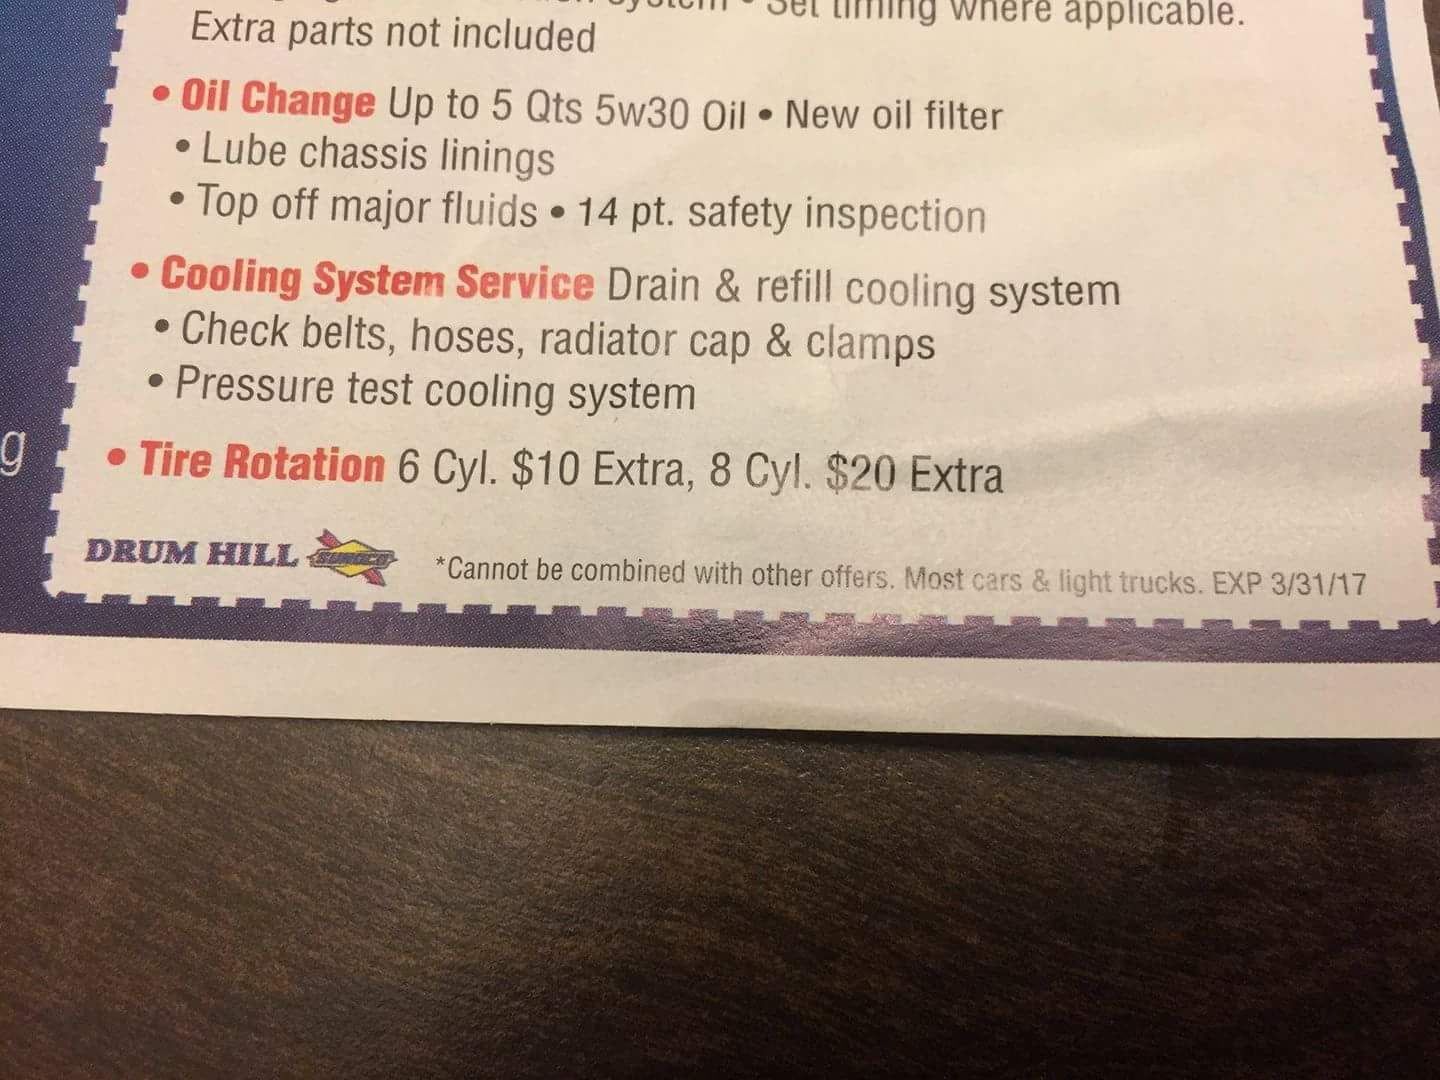 Because everyone knows its harder to do tire rotations for 6 and 8 cylinder cars